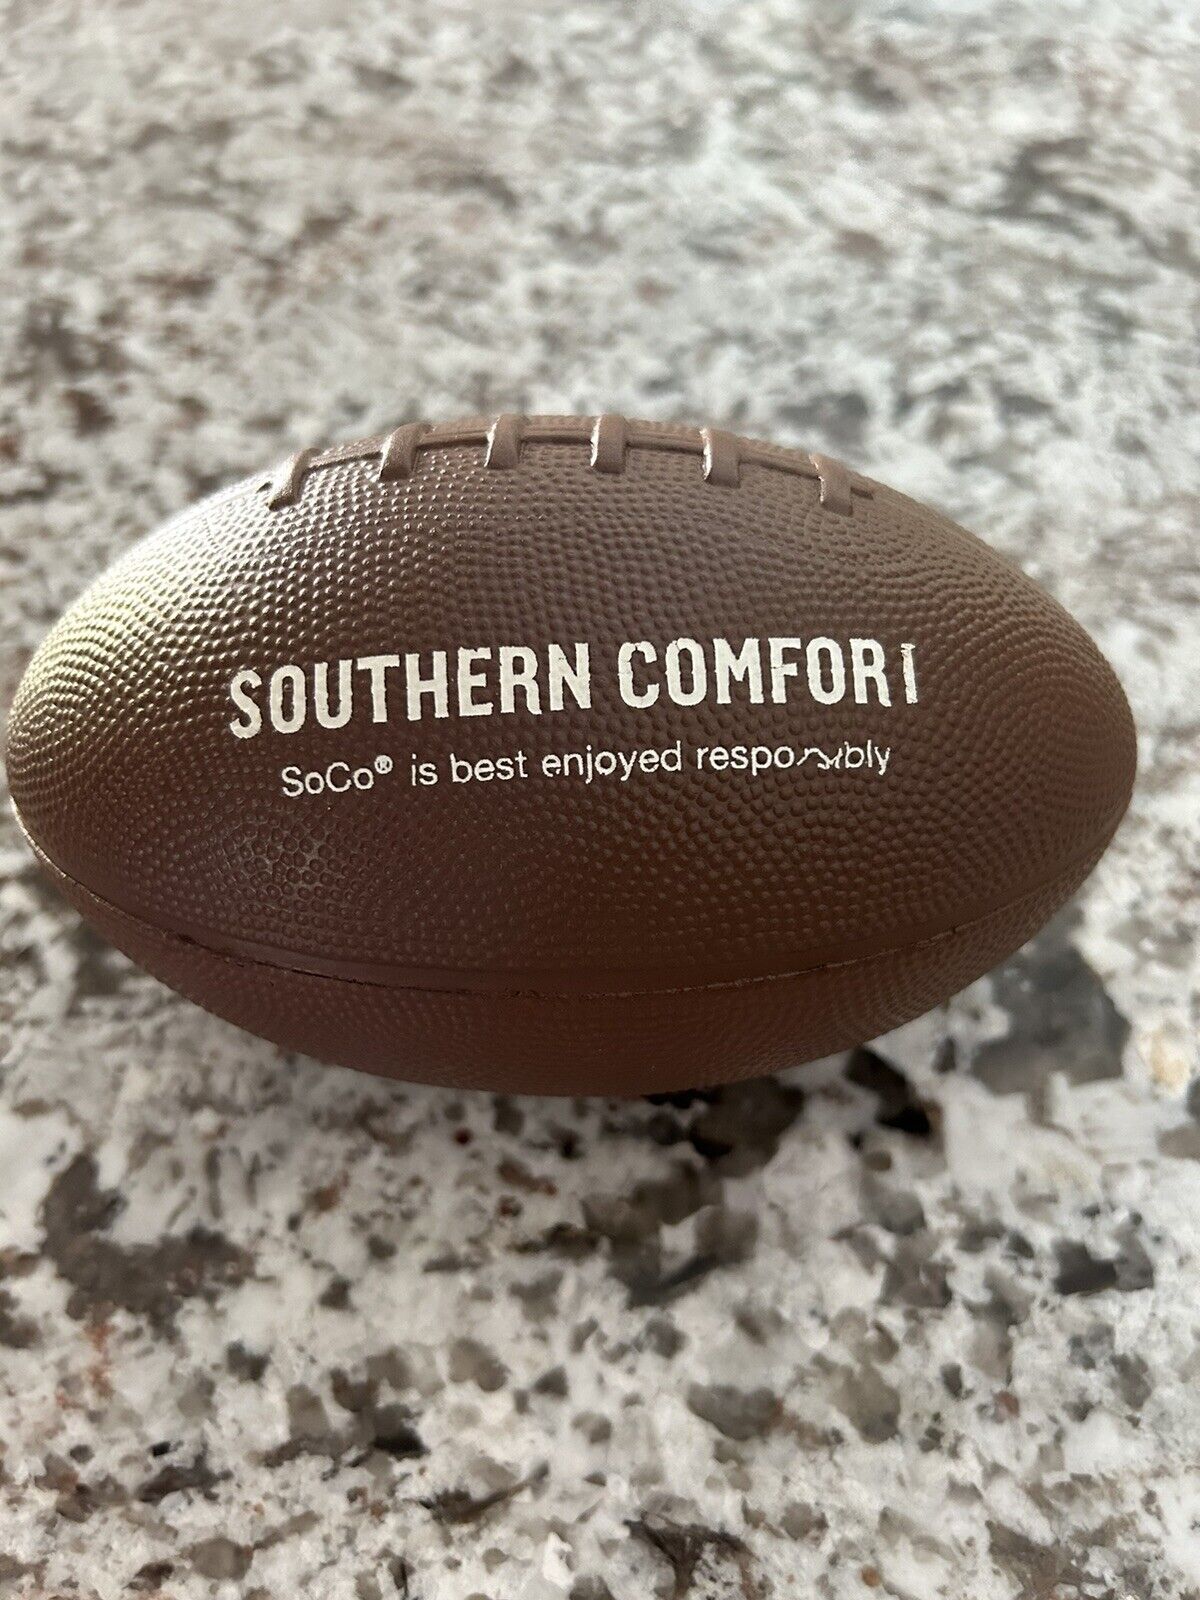 NEW Collectible Southern Comfort Whiskey Mini Football